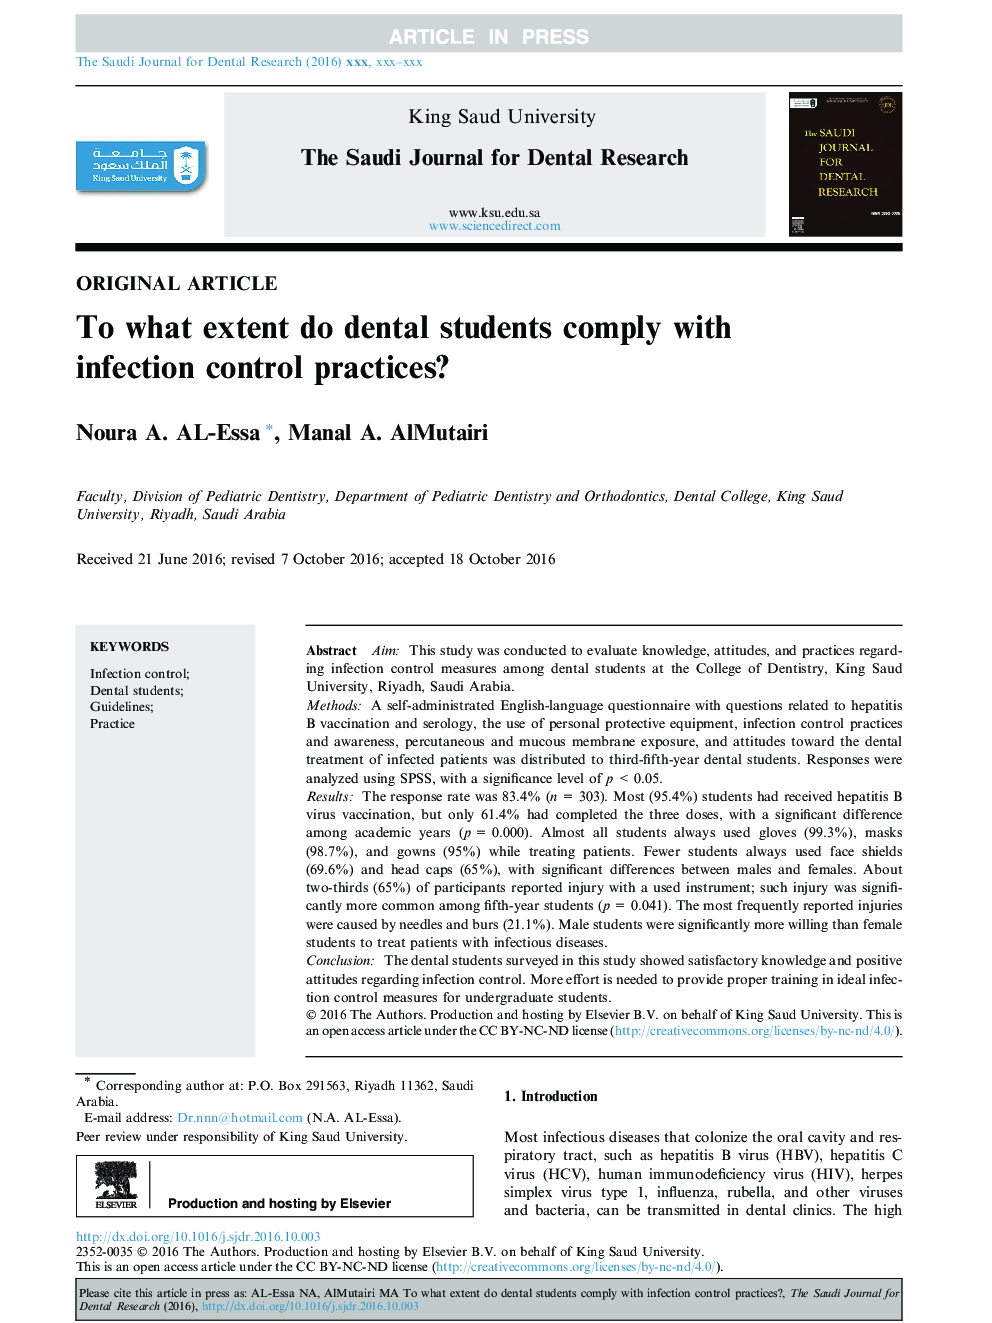 To what extent do dental students comply with infection control practices?